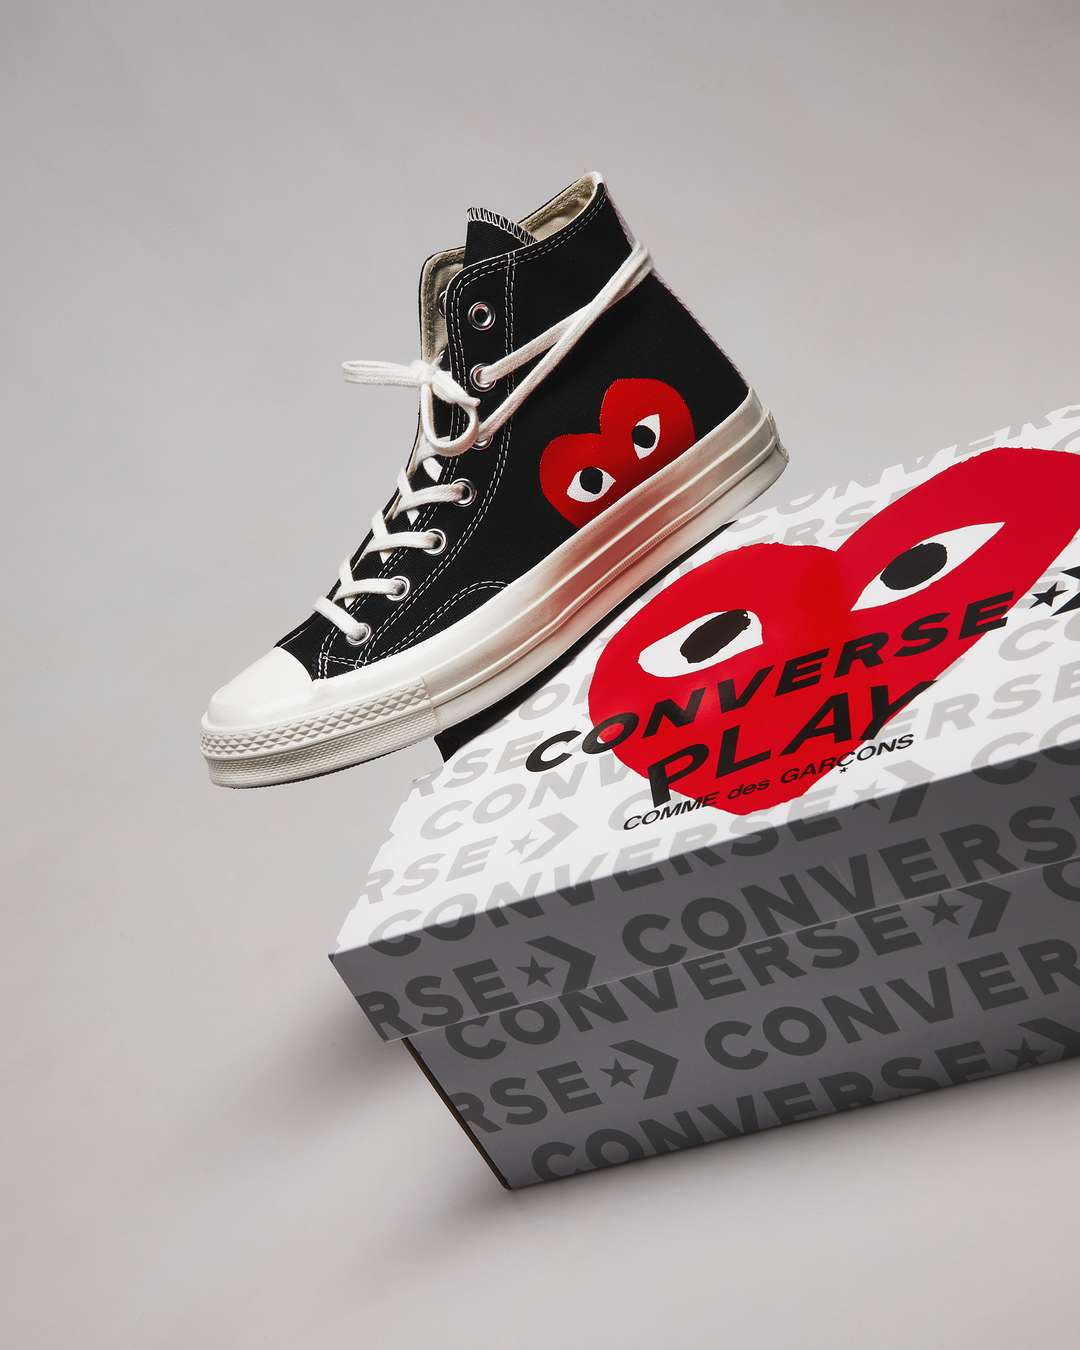 Demokratisk parti landsby Marquee END. on Twitter: "One of the most sought-after sneaker collaborations,  Converse and Comme des Garçons PLAY's Chuck Taylor Hi is available online  -- https://t.co/c95u2cpQLA https://t.co/FVwb8pmWTC" / Twitter